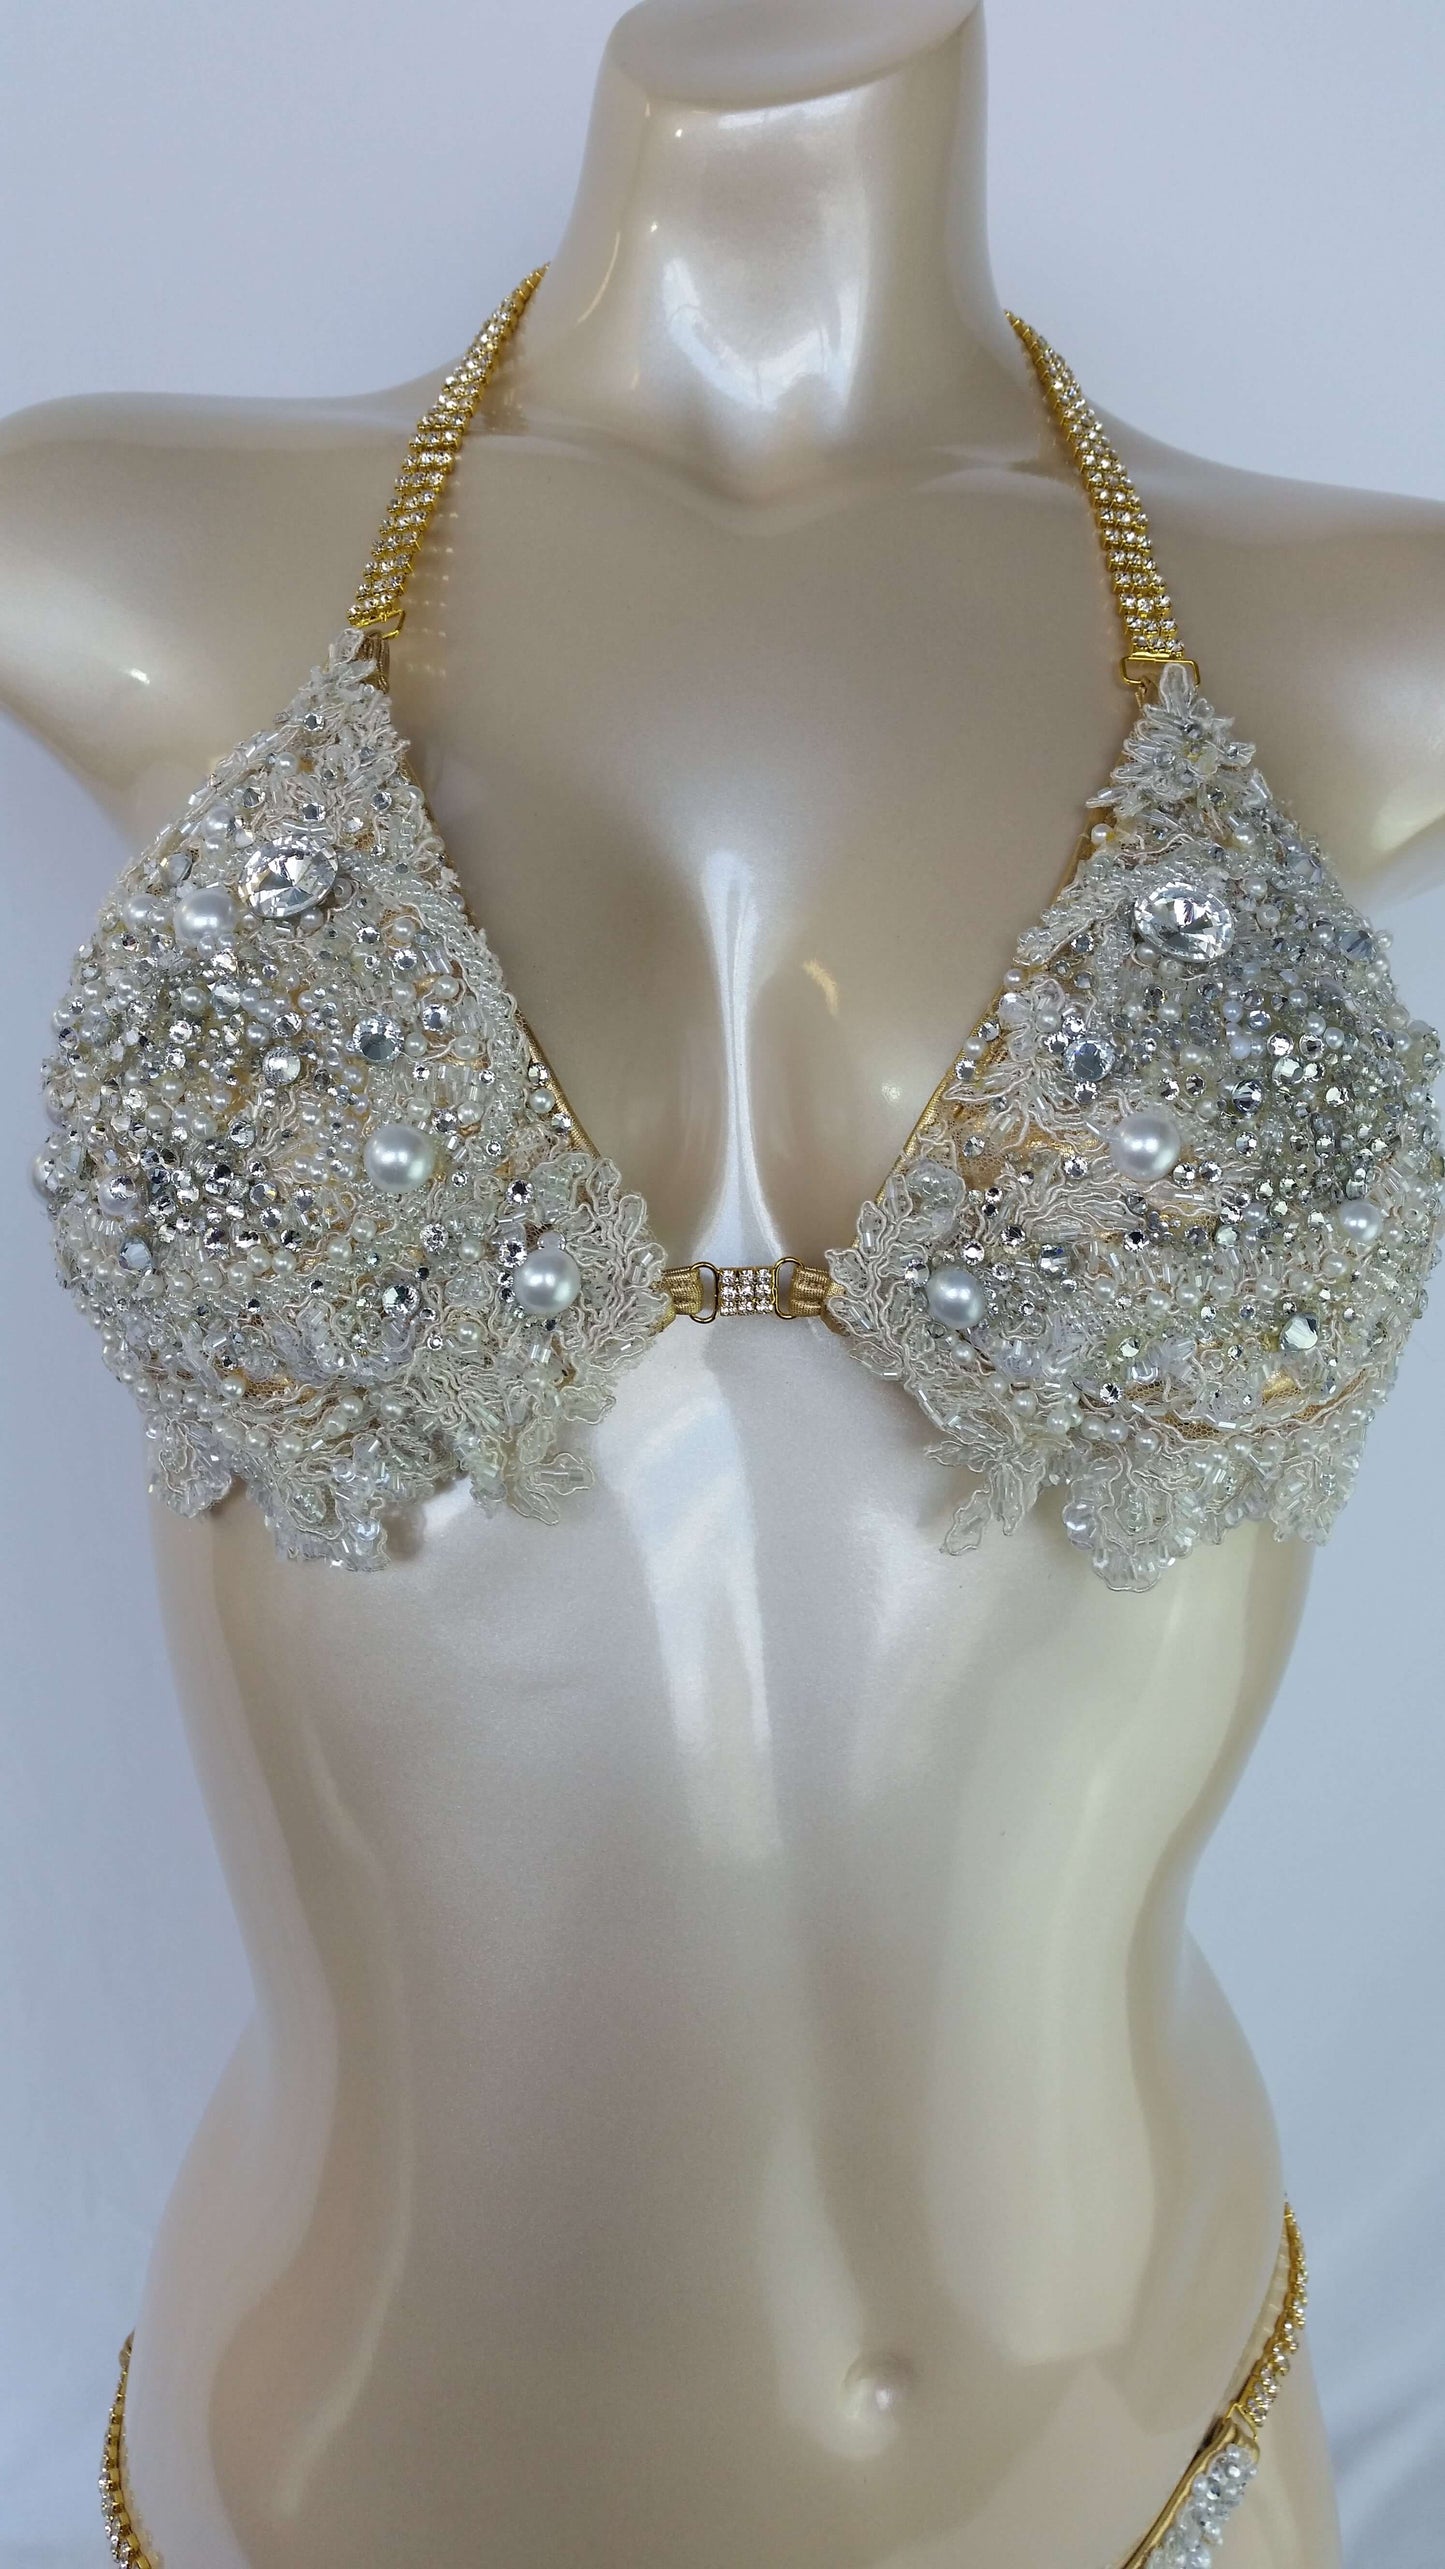 Gold bikini with embroidered wedding lace, crystals and costume pearls design